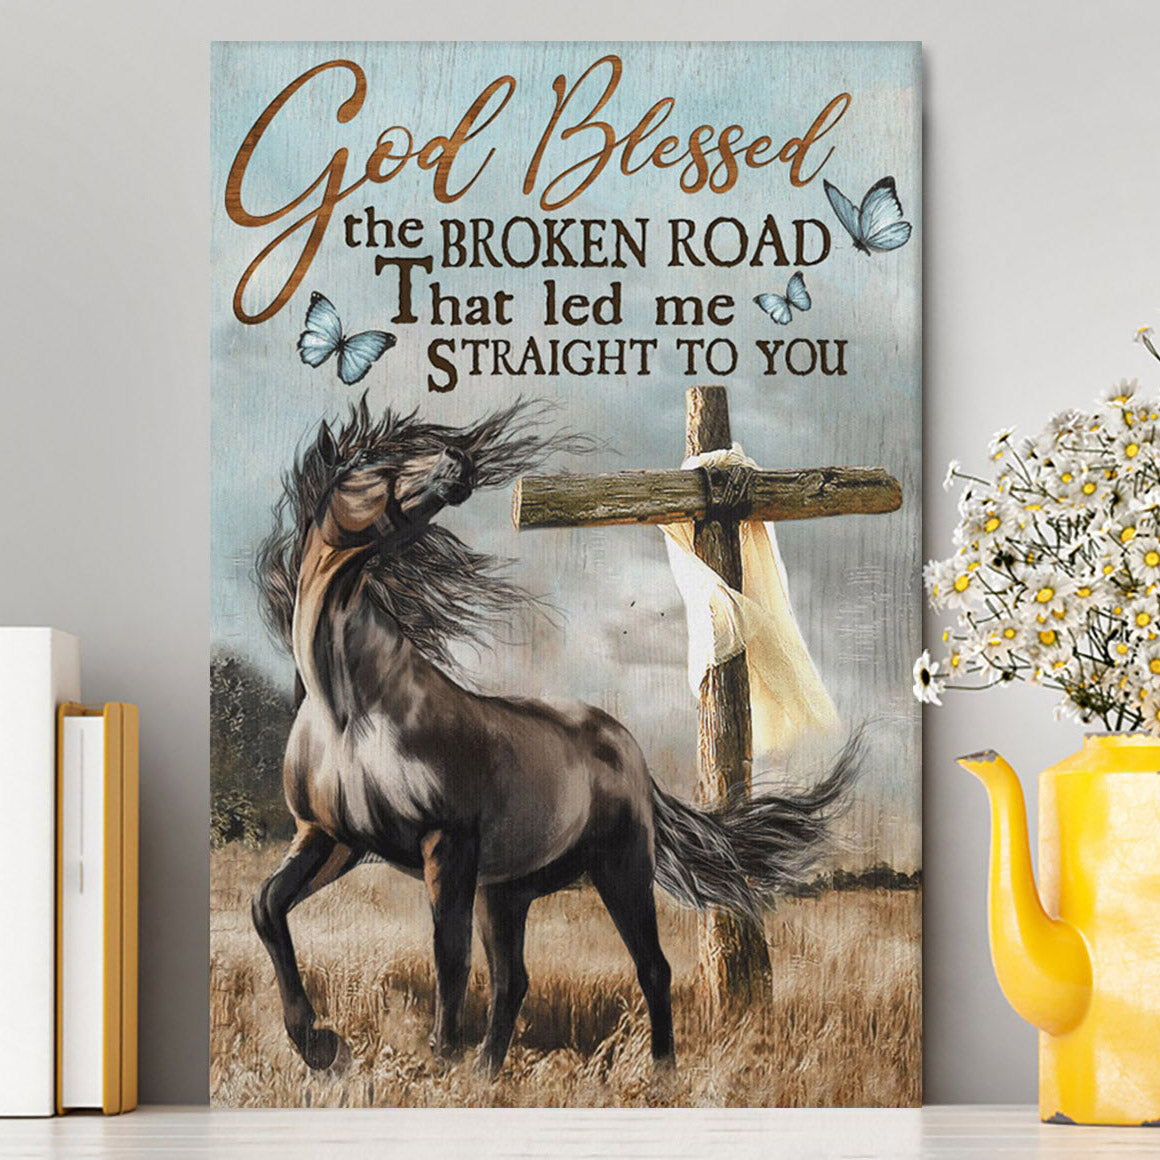 God Blessed The Broken Road That Led Me Straight To You Canvas - Horse Cross Butterflies Canvas Wall Art - Christian Wall Art Decor